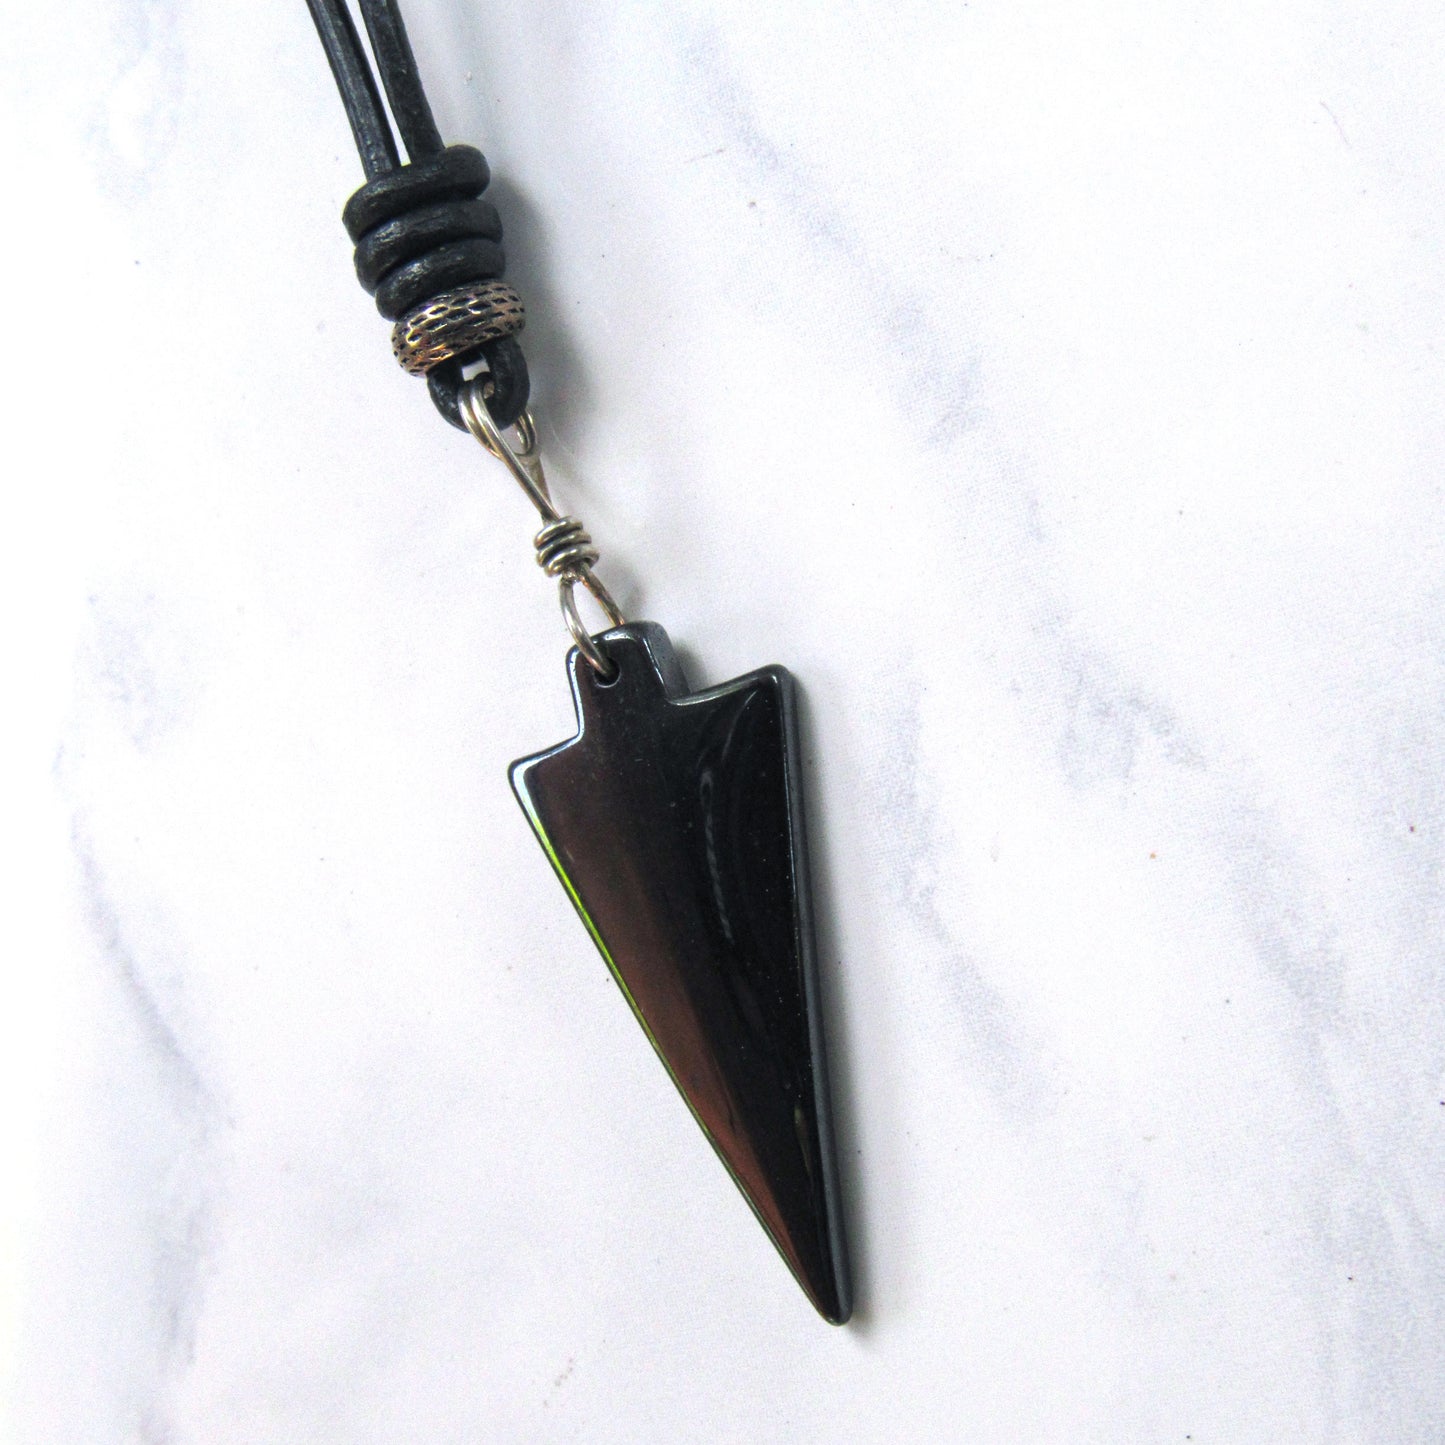 Hematite Arrow Hand Wrapped and Knotted with Sterling Silver on Leather Necklace